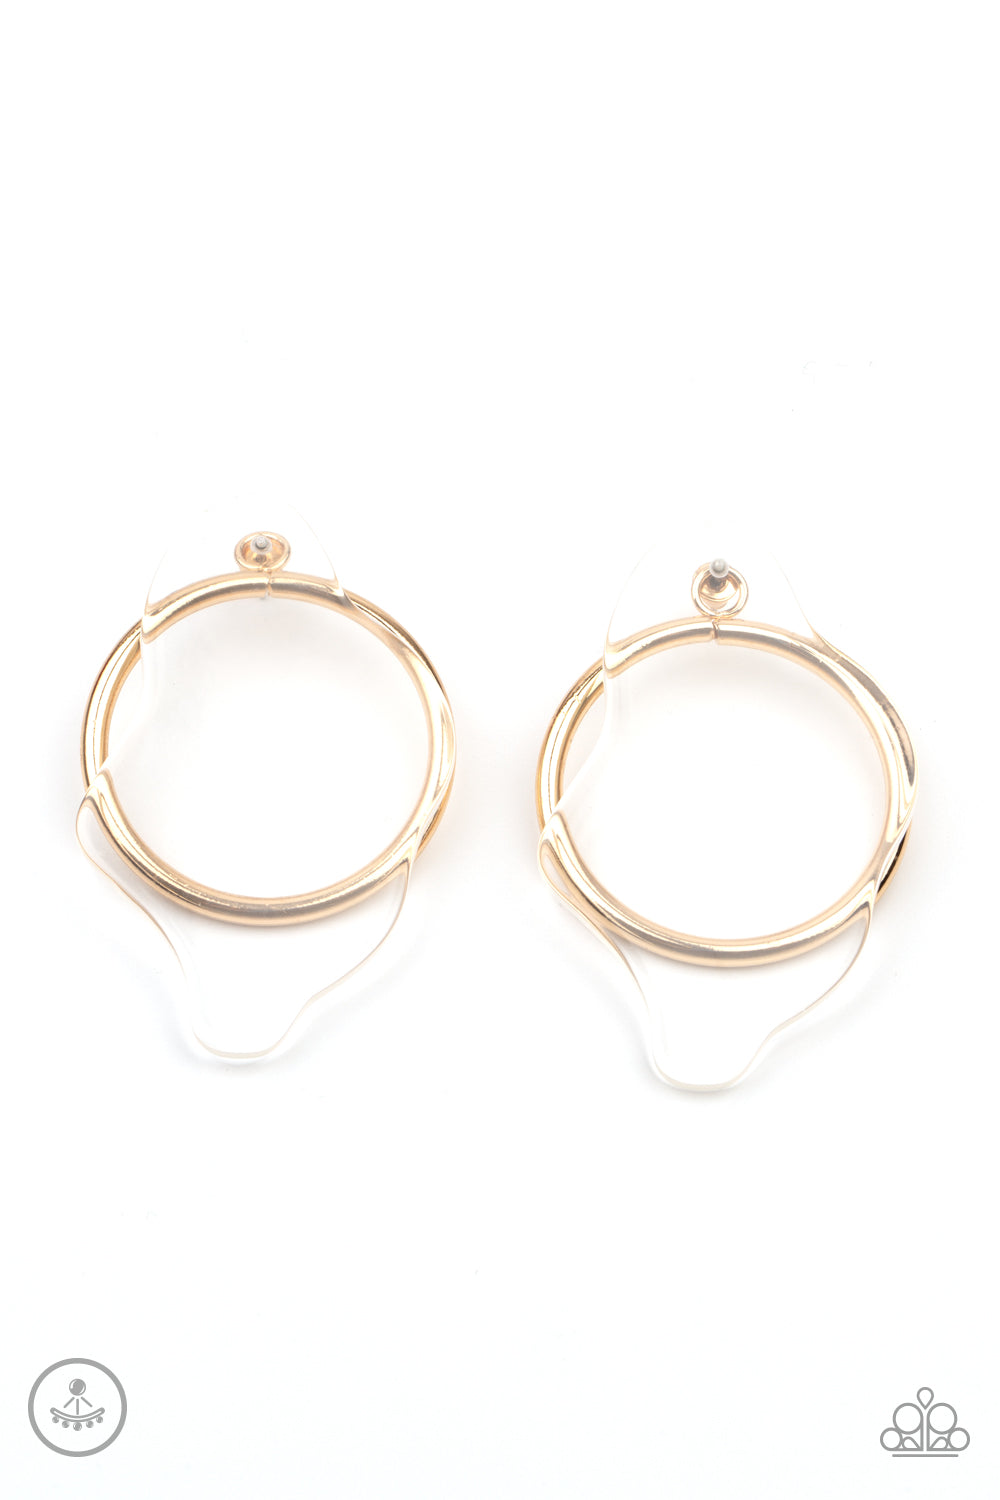 Clear The Way! - Gold Earrings